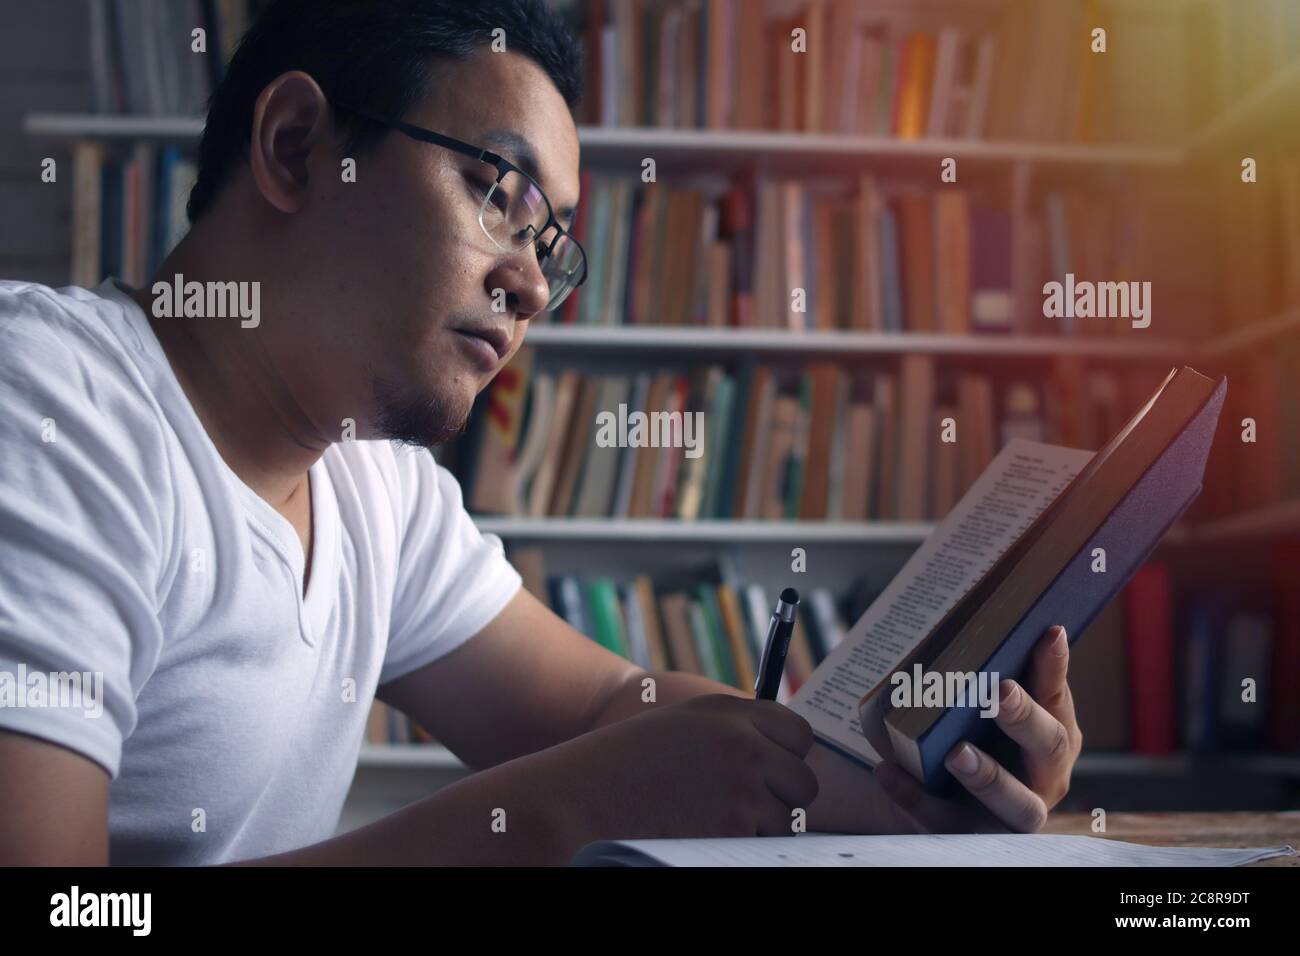 Young Asian man studying learning in library, exam preparation concept. Male college student doing research and making notes in his book Stock Photo